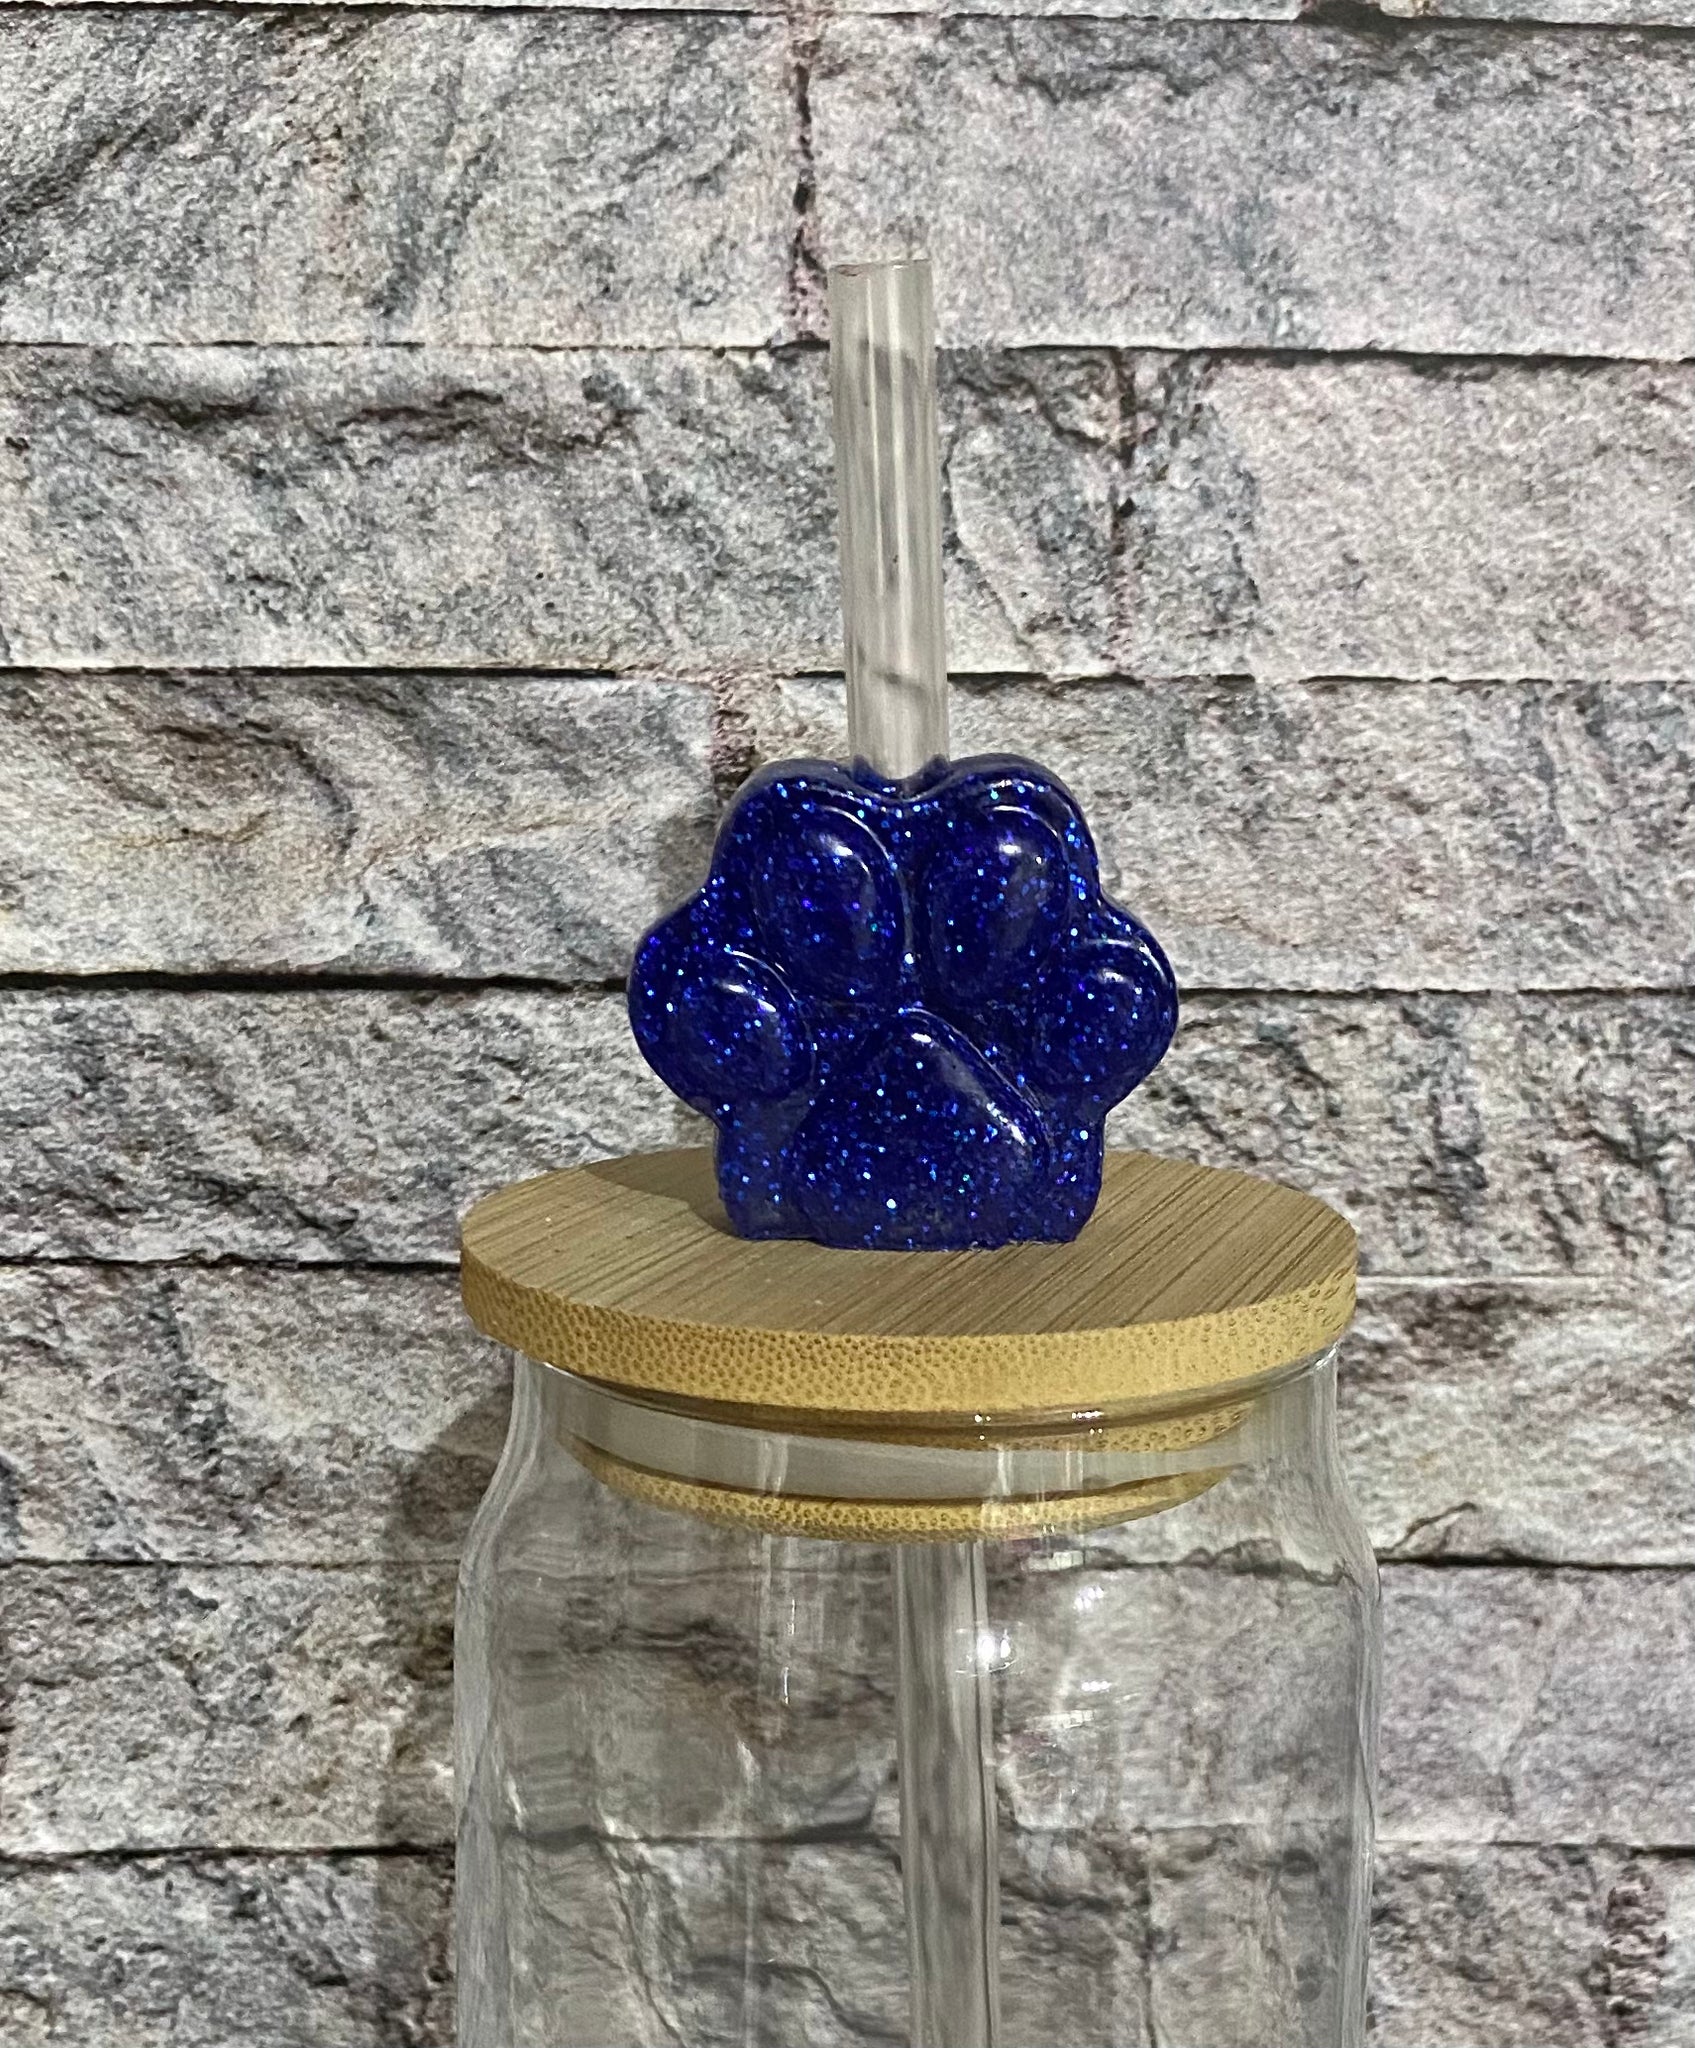 Paw Print Straw Toppers